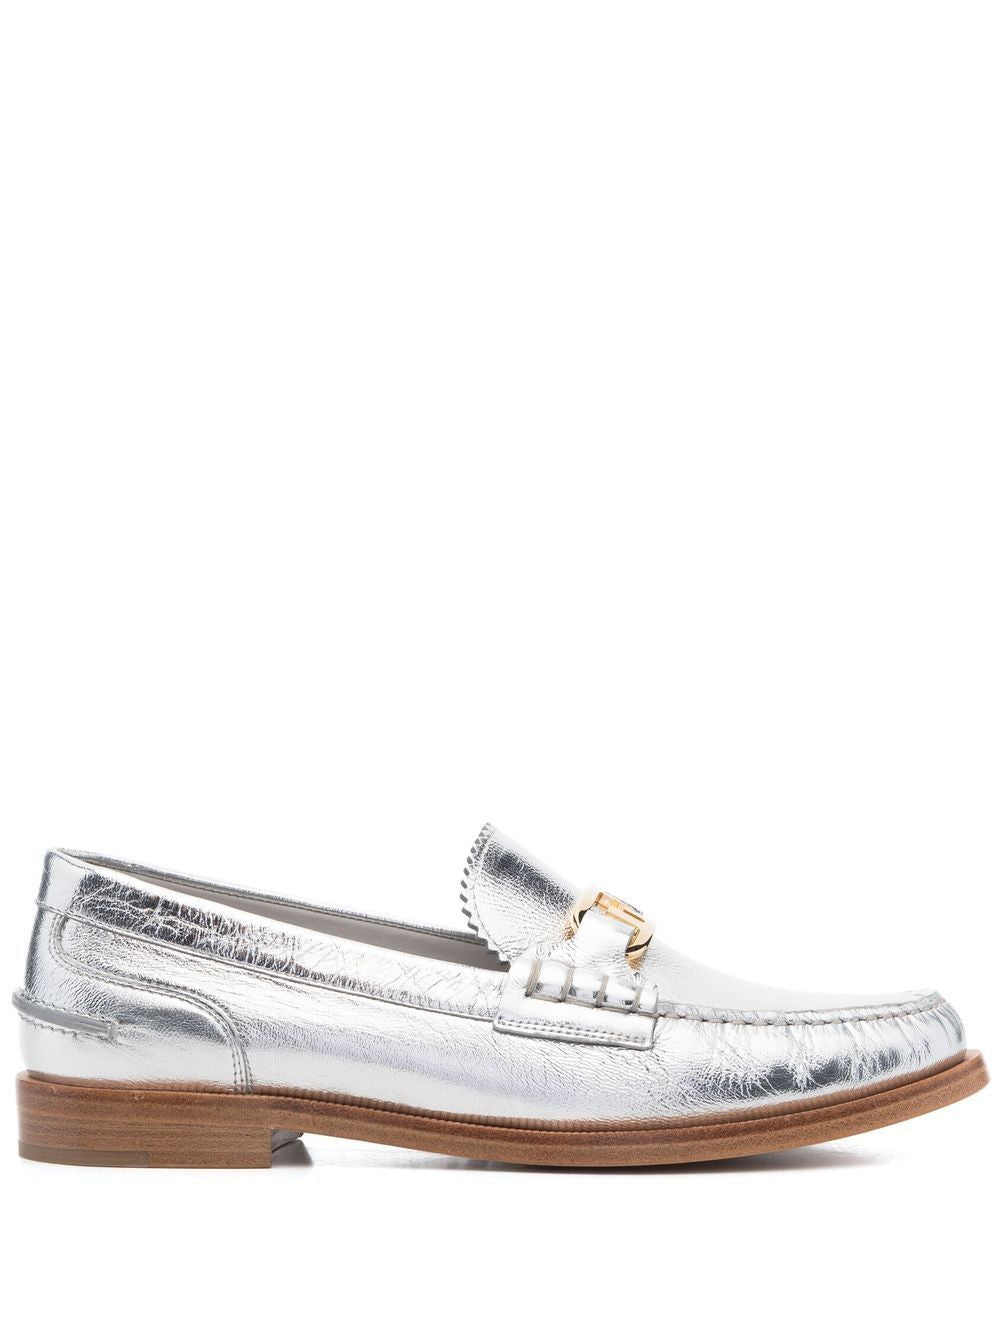 FENDI Silver Metallic Slip On Loafers for Women - SS22 Collection